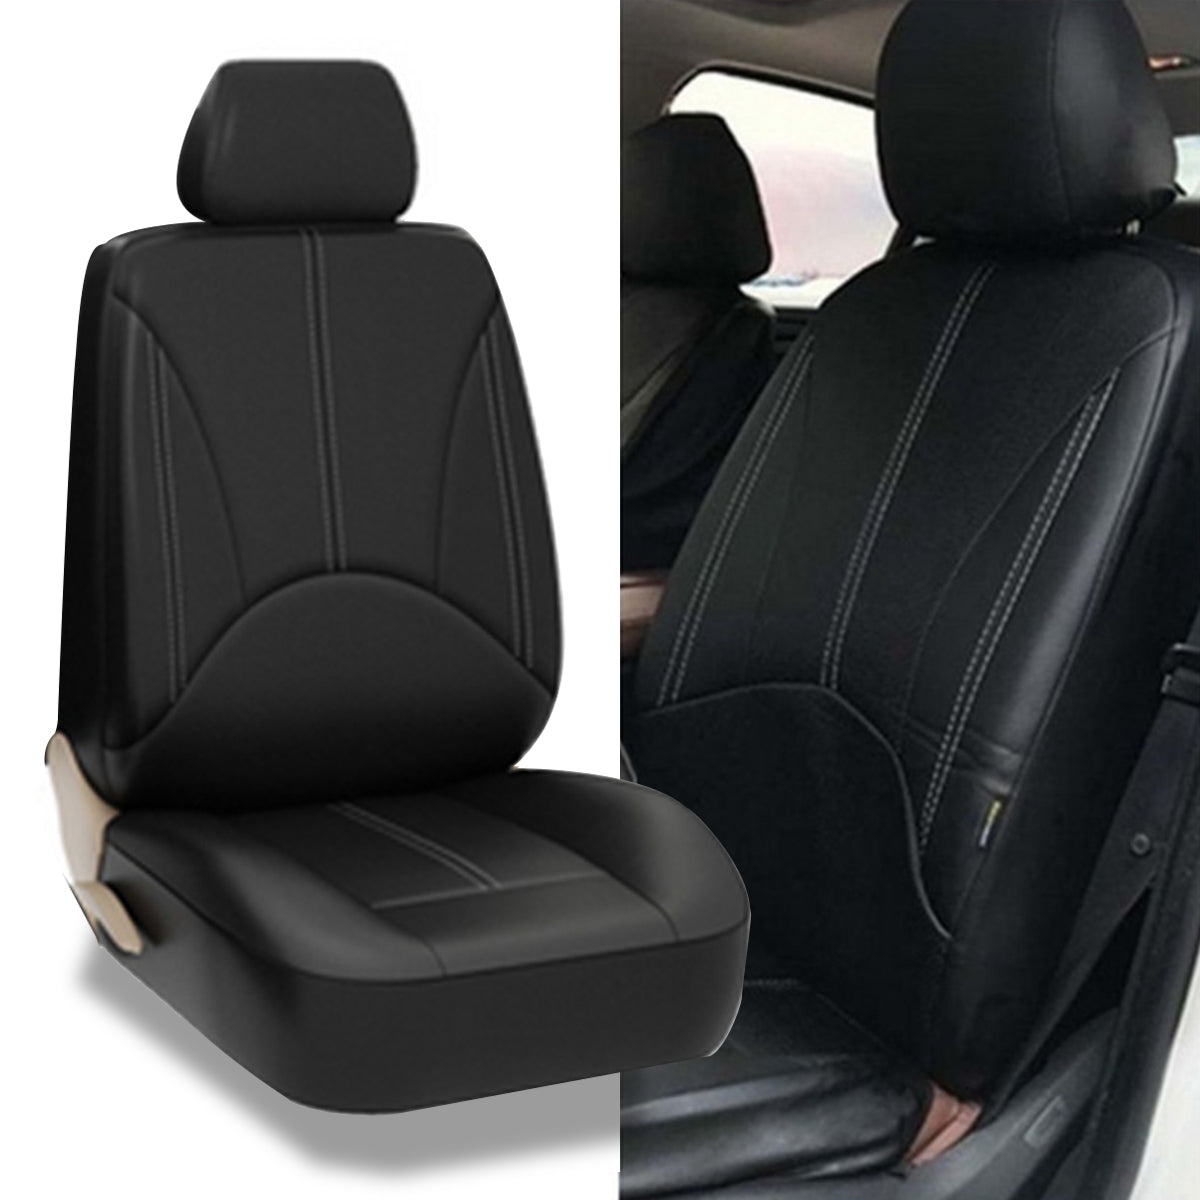 Bucket Seat Cover Set Front Rear Universal for Car Sedan Truck SUV PU Leather - Auto GoShop